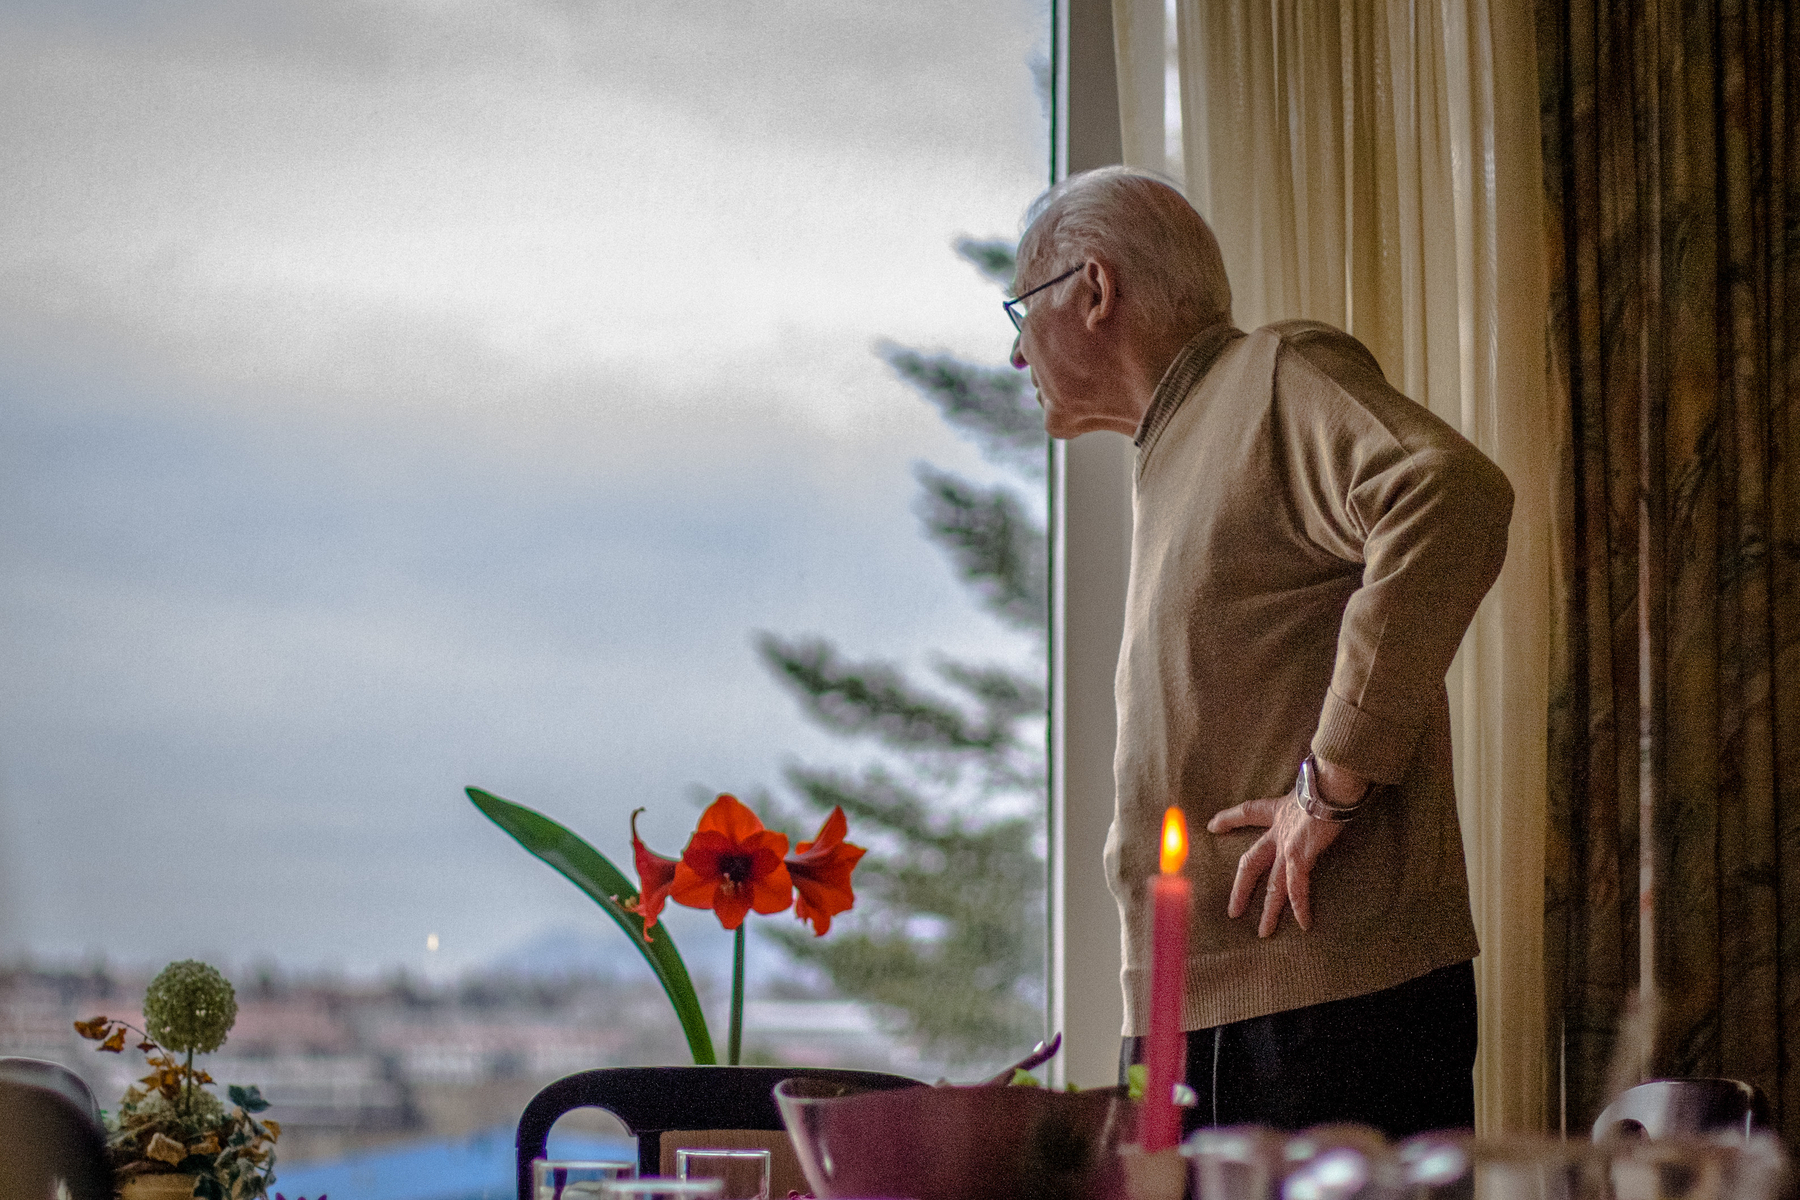 My granddad, Ingvar Magnússon, looks out of his living room window.